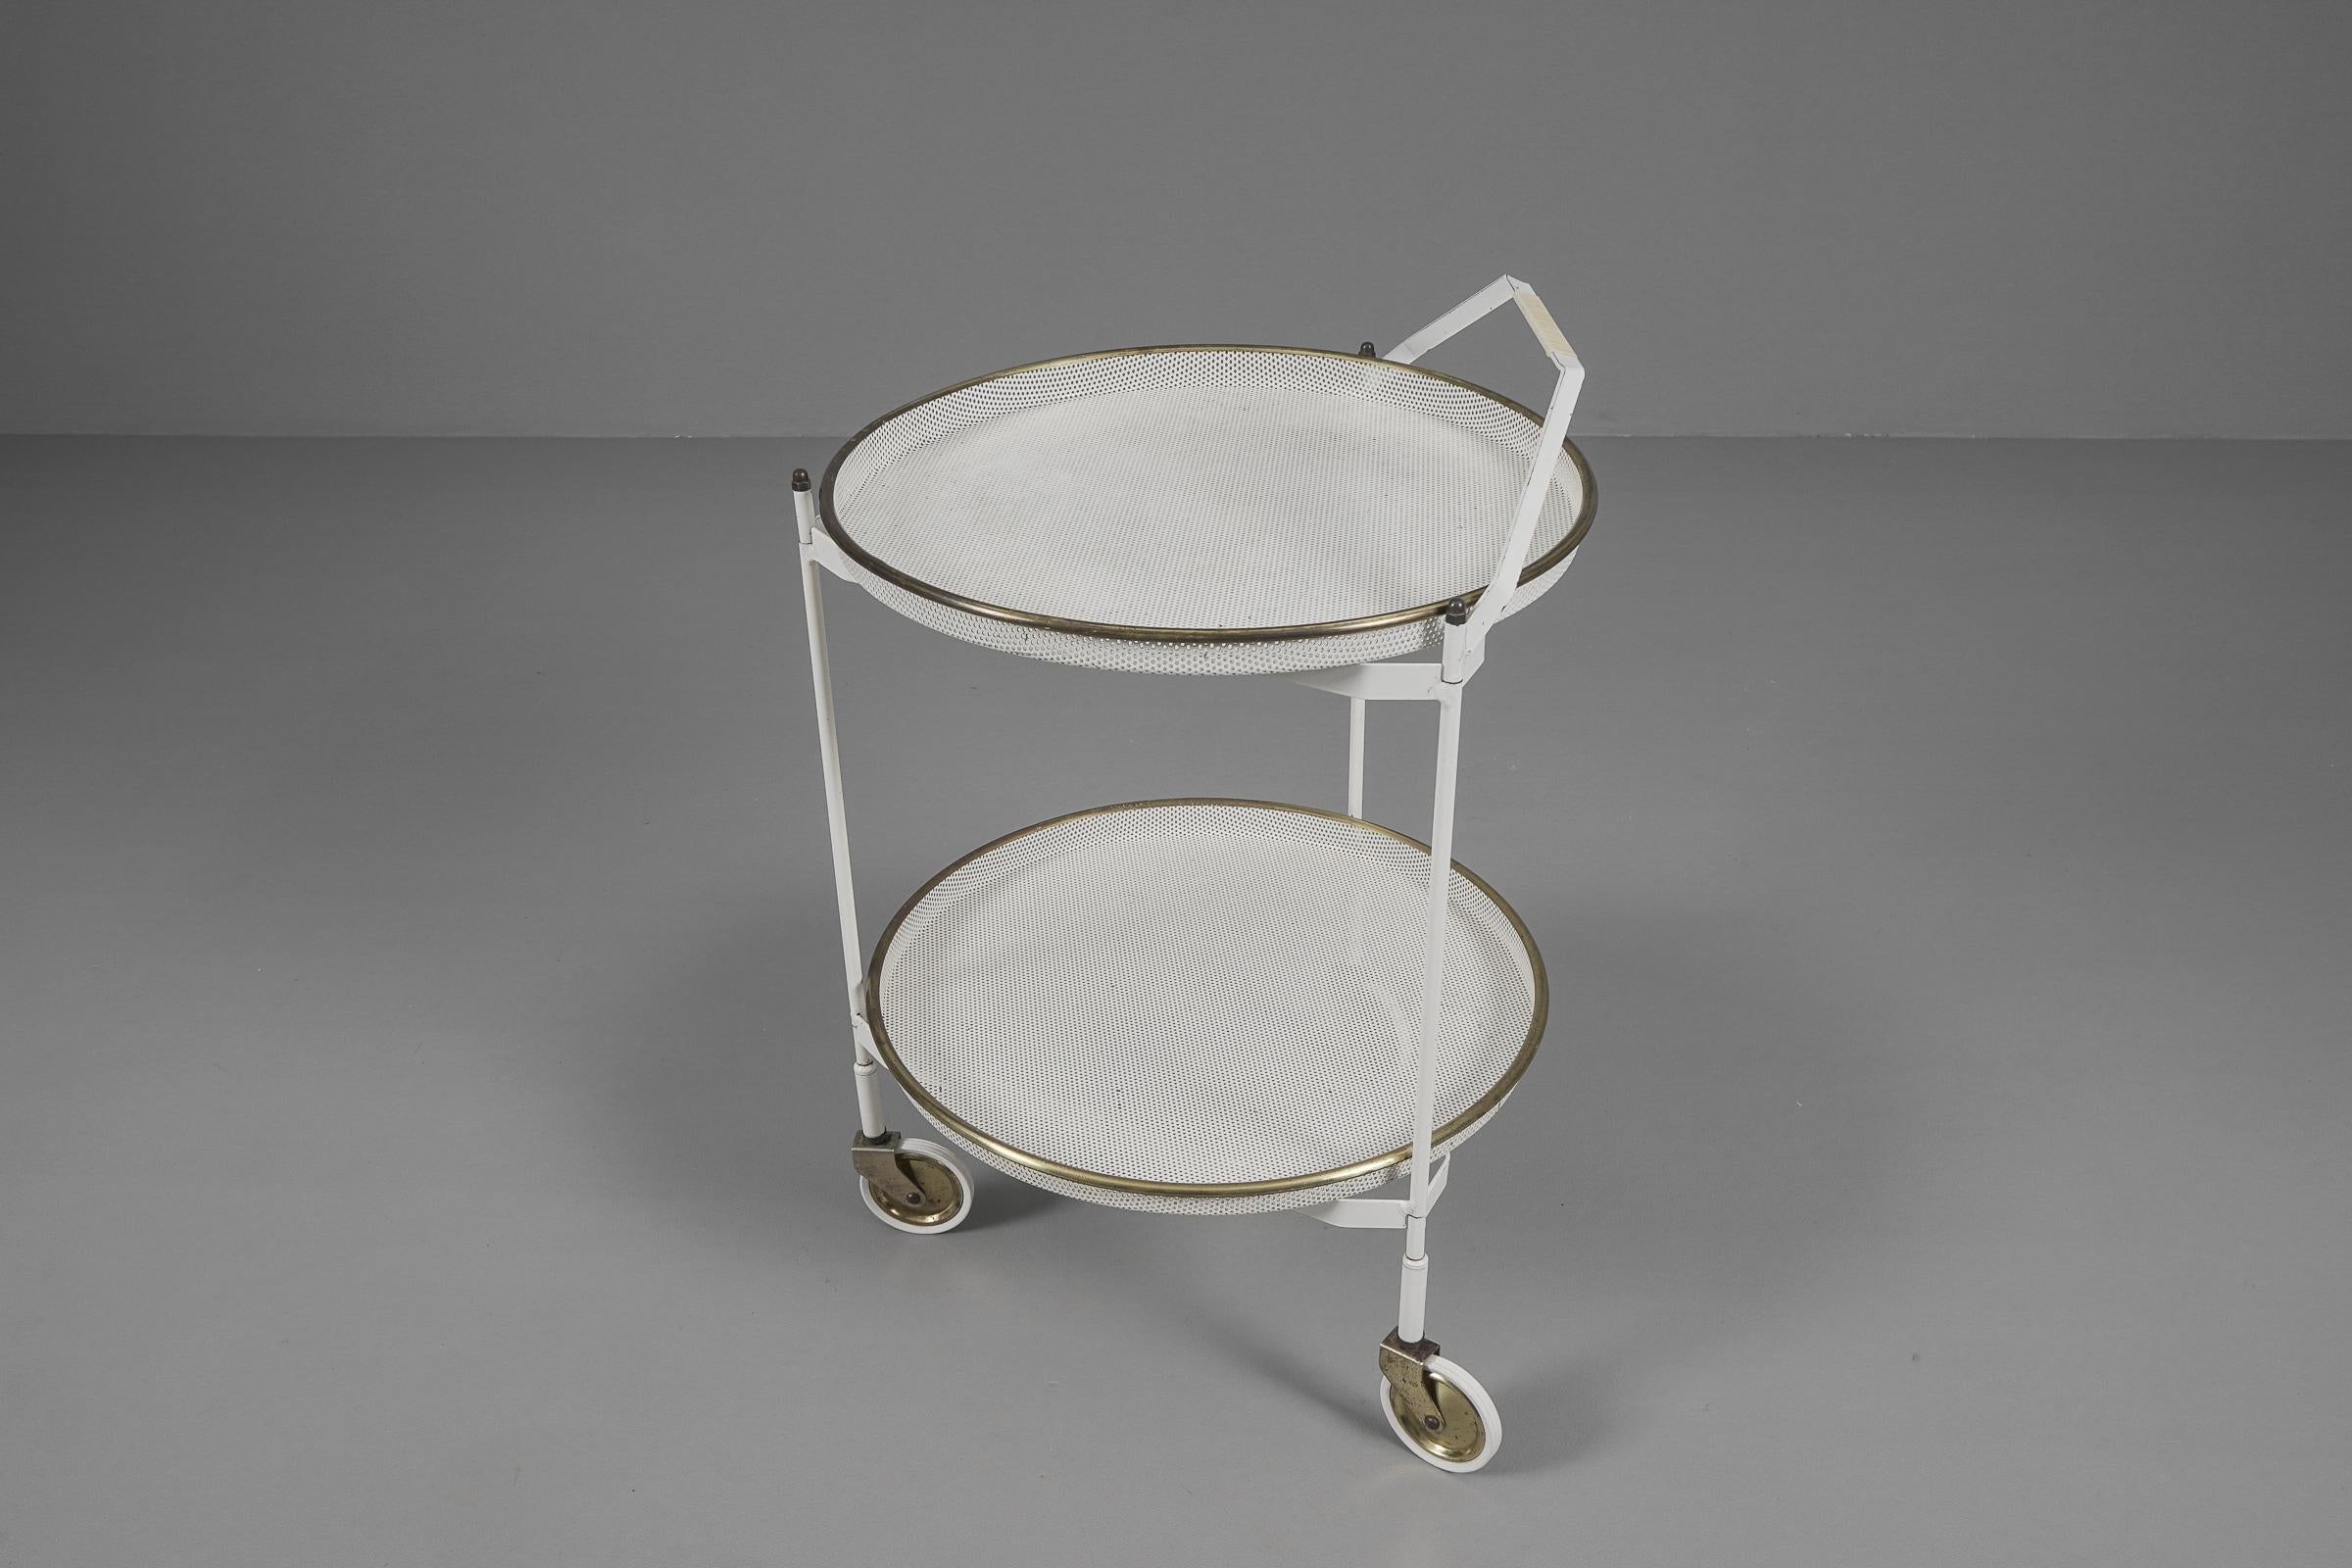 Metal Mid-Century Modern Bar Cart with Removable Trays in Mategot Style, France, 1950s For Sale